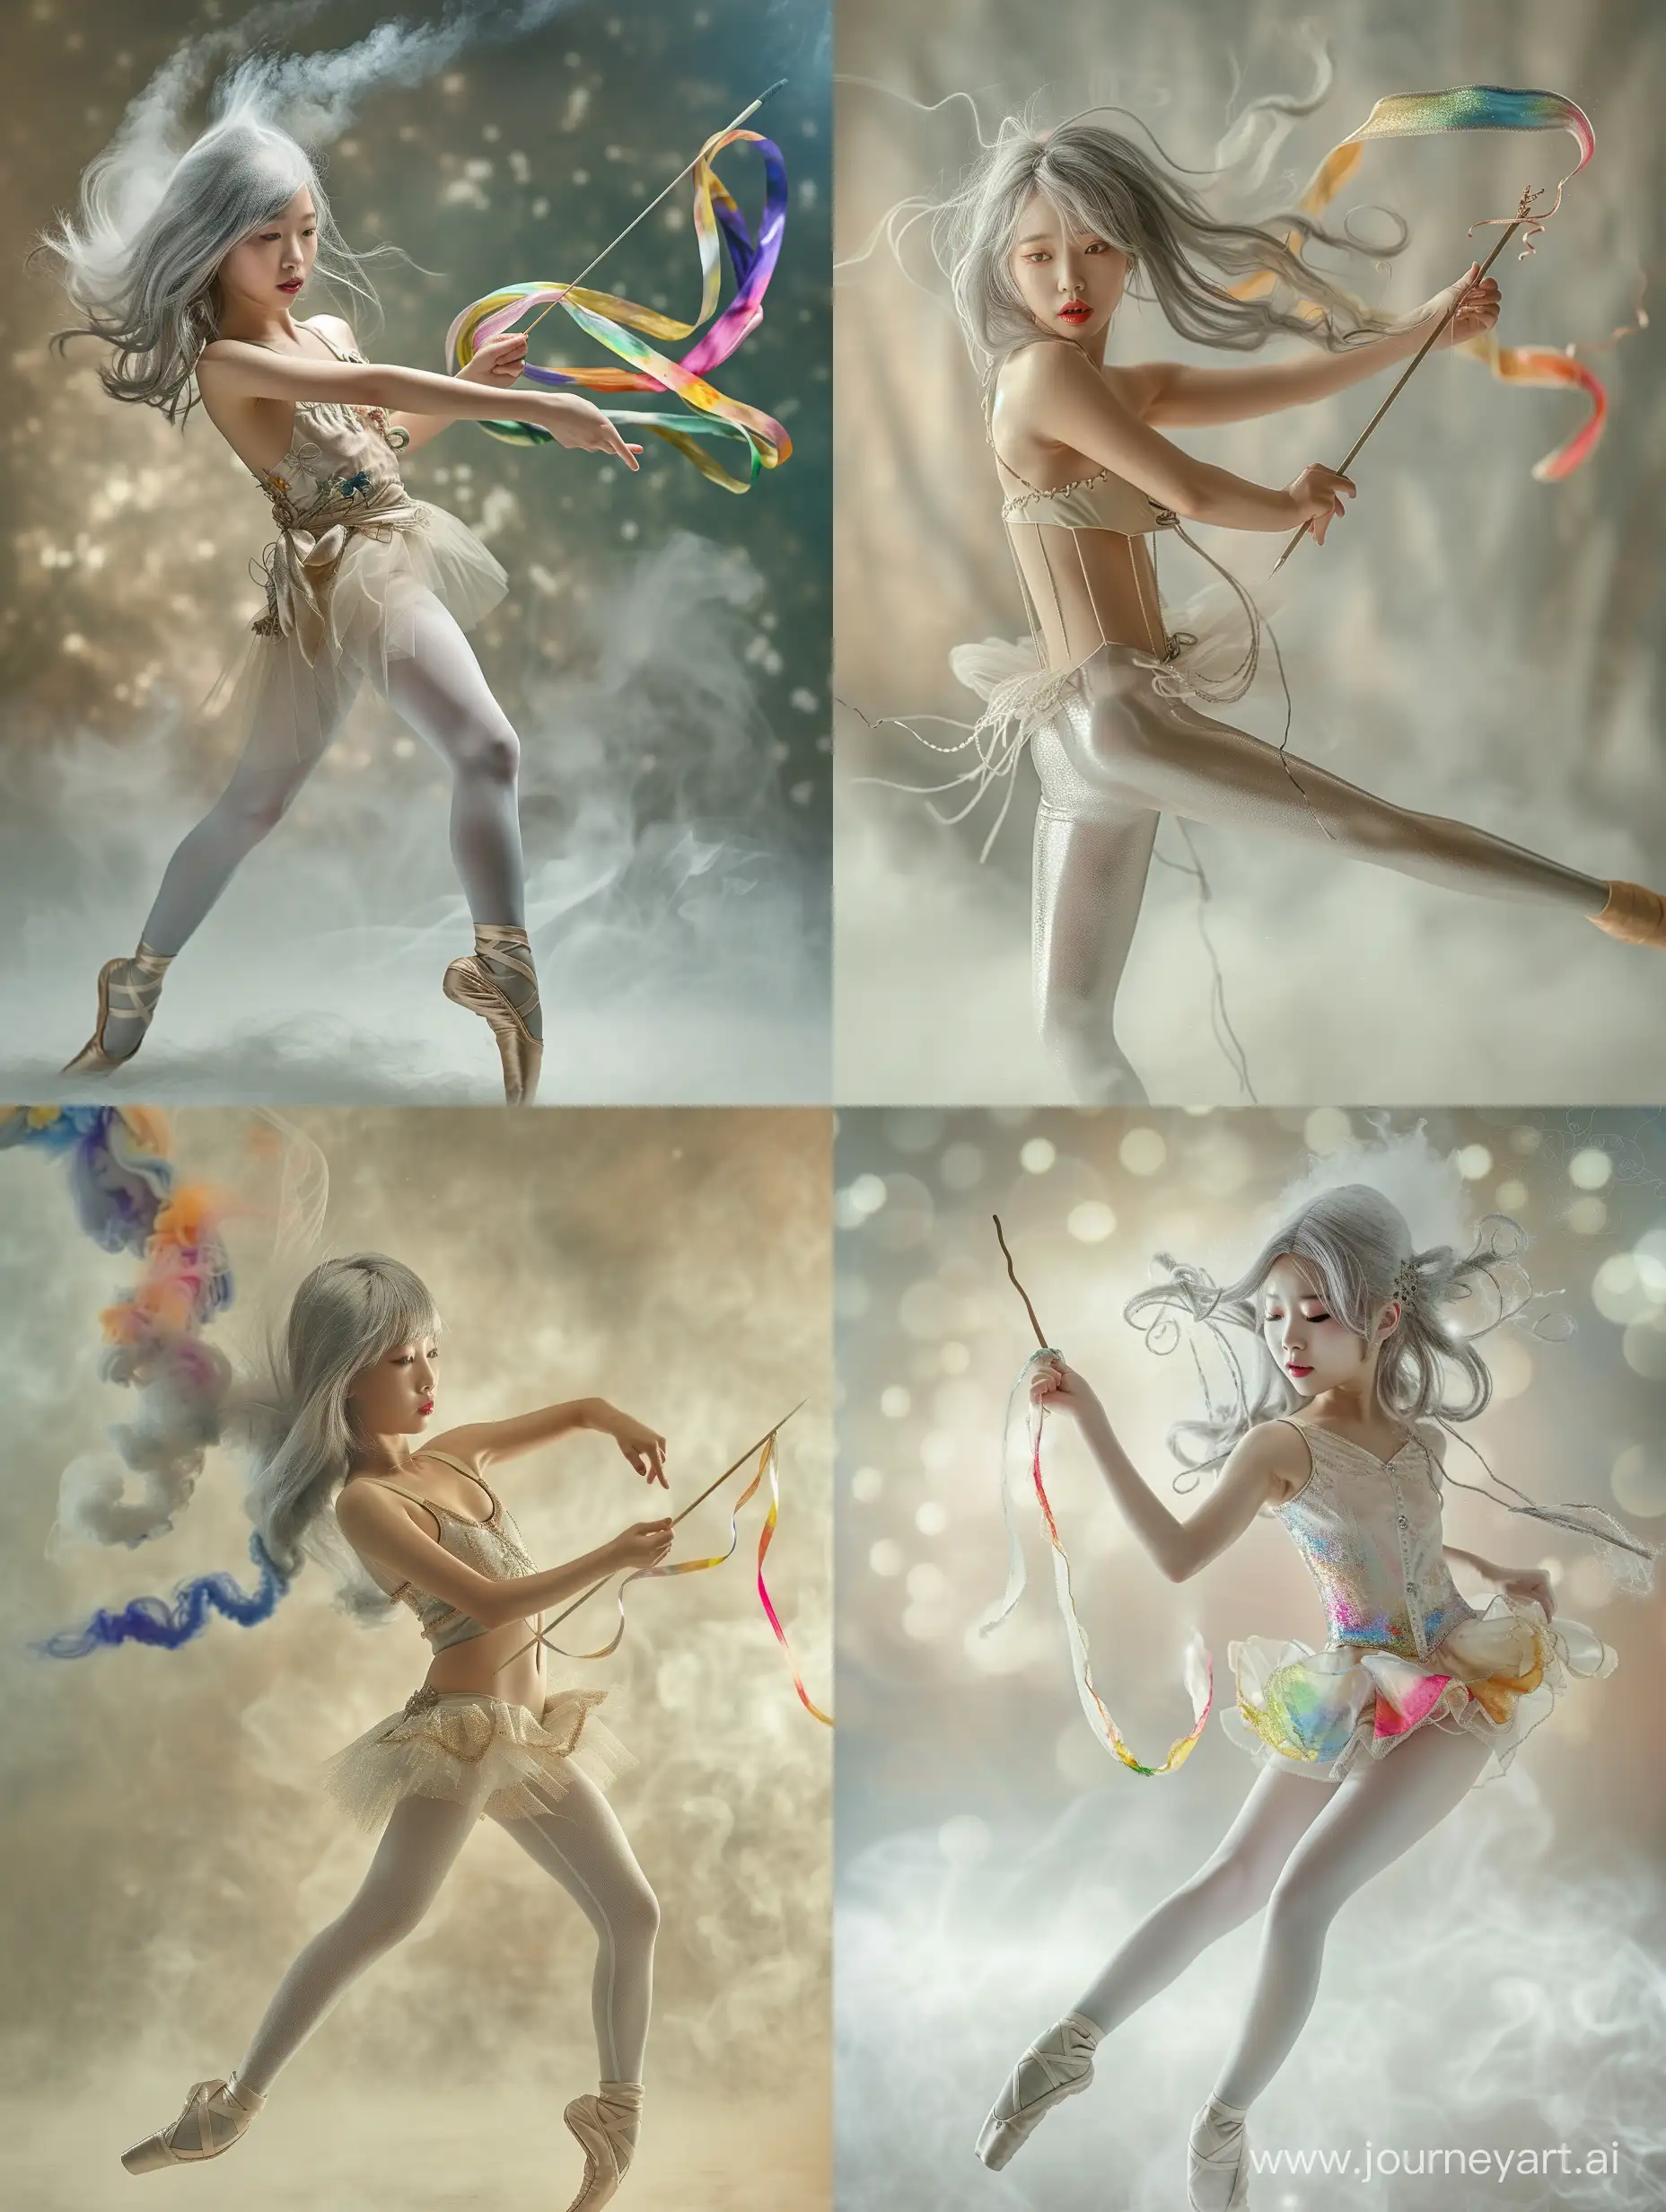 Surrealist-Silk-Dancing-Modern-Asian-Woman-in-Ballet-Attire-with-Smokeformed-Silver-Hair